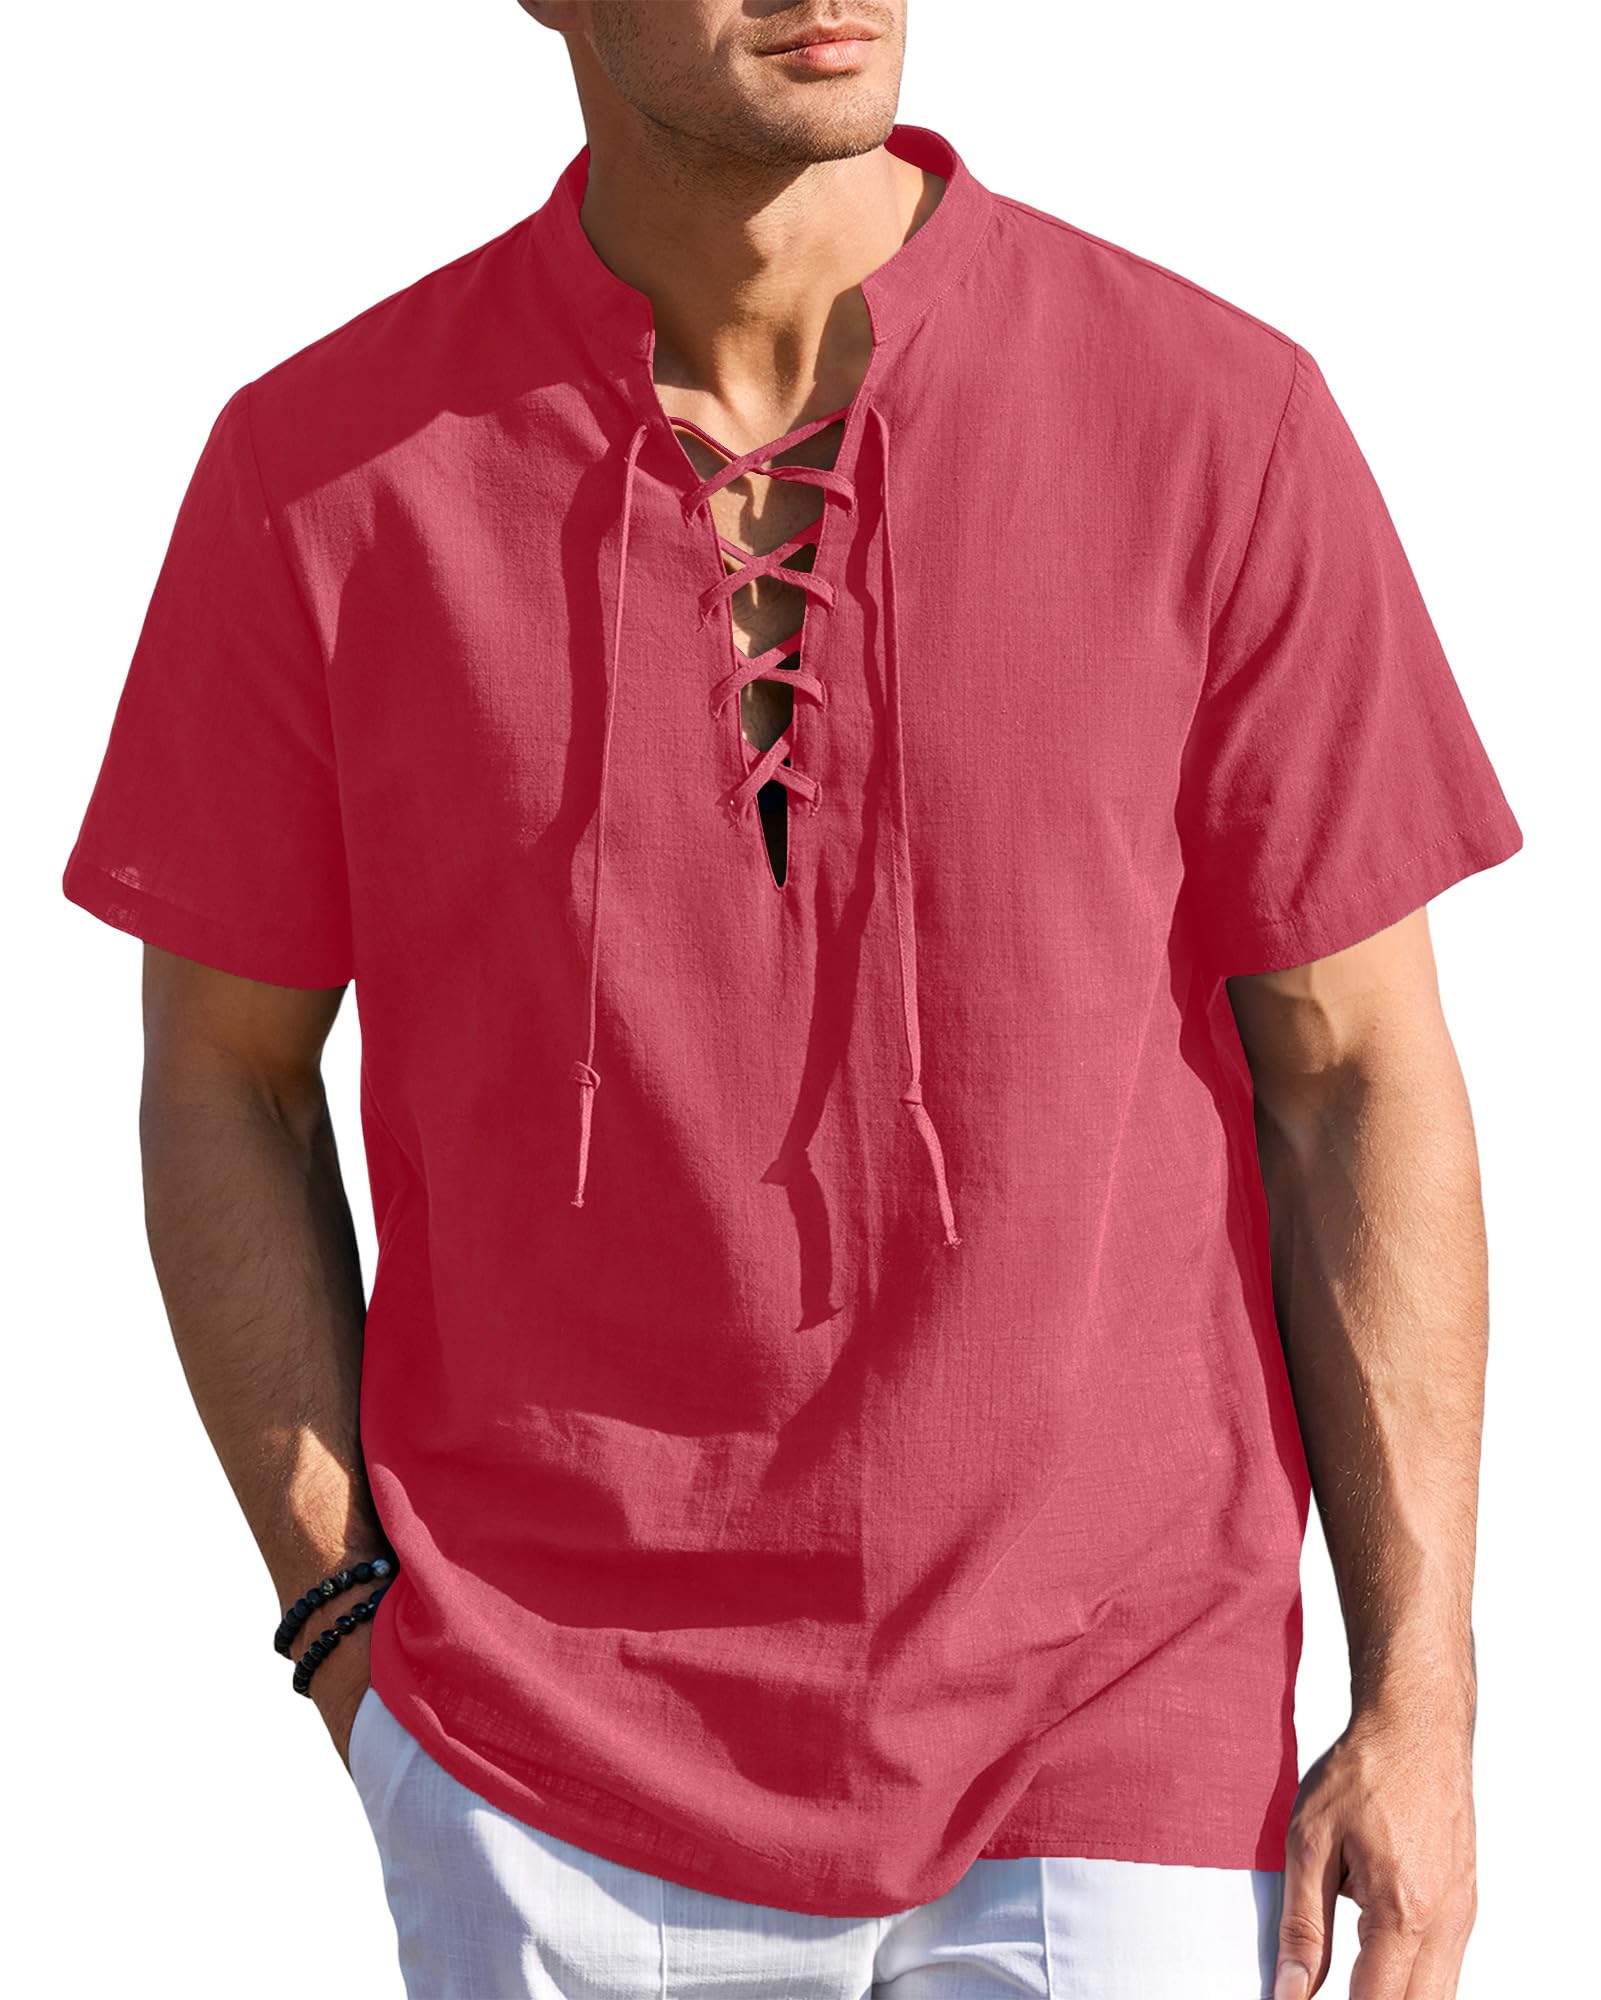 Pirate Shirt Red - Lace Up Neck